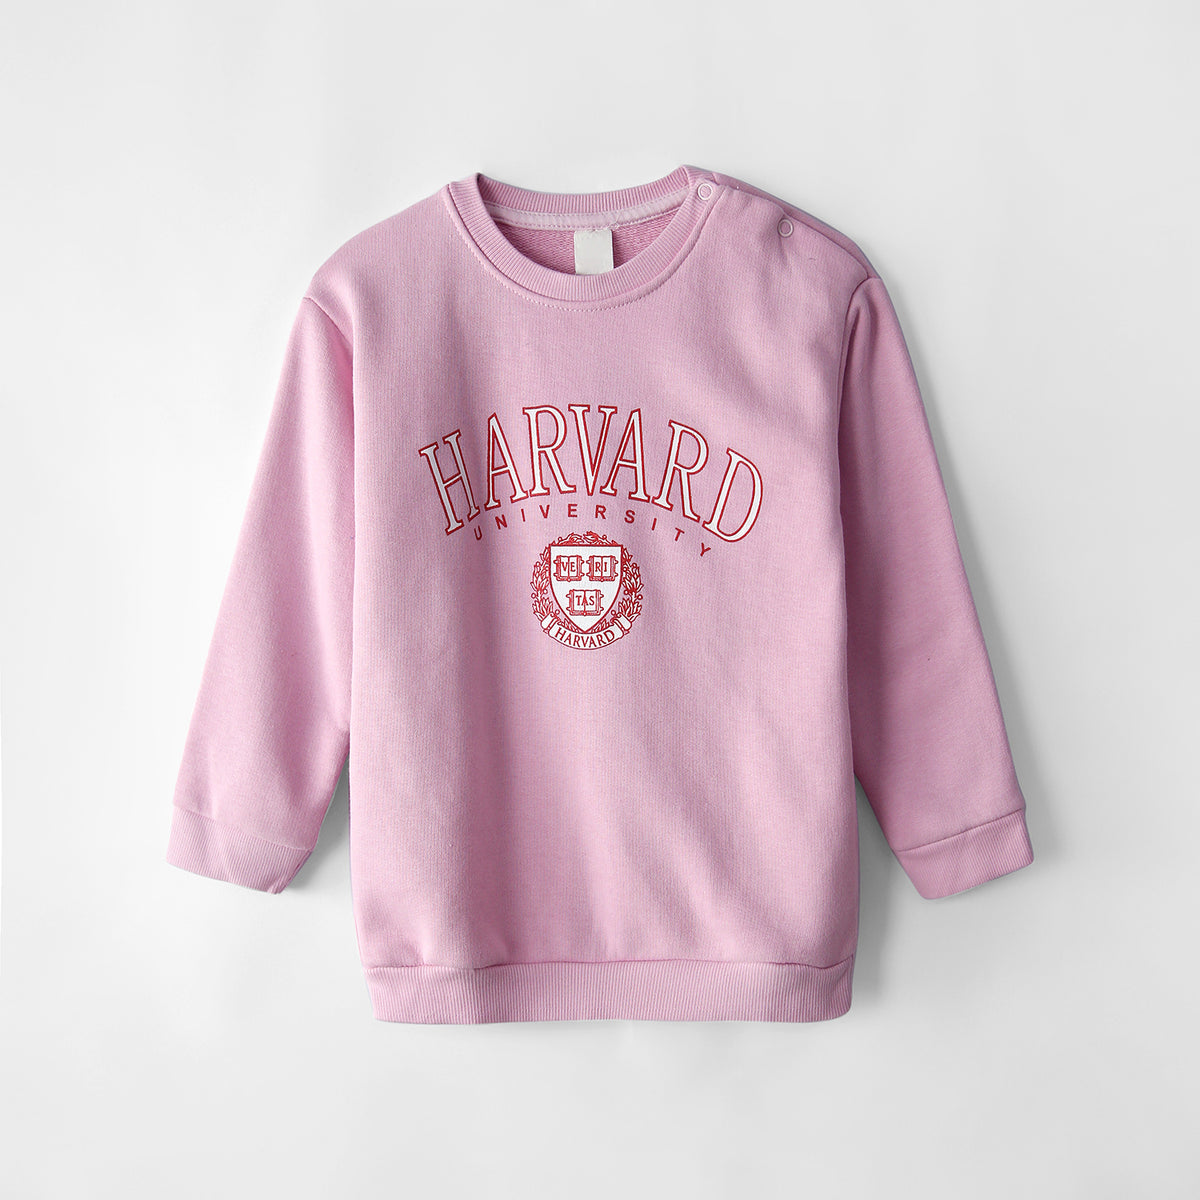 Kids Premium Quality Printed Pink Sweatshirt With Shoulder Snap Button